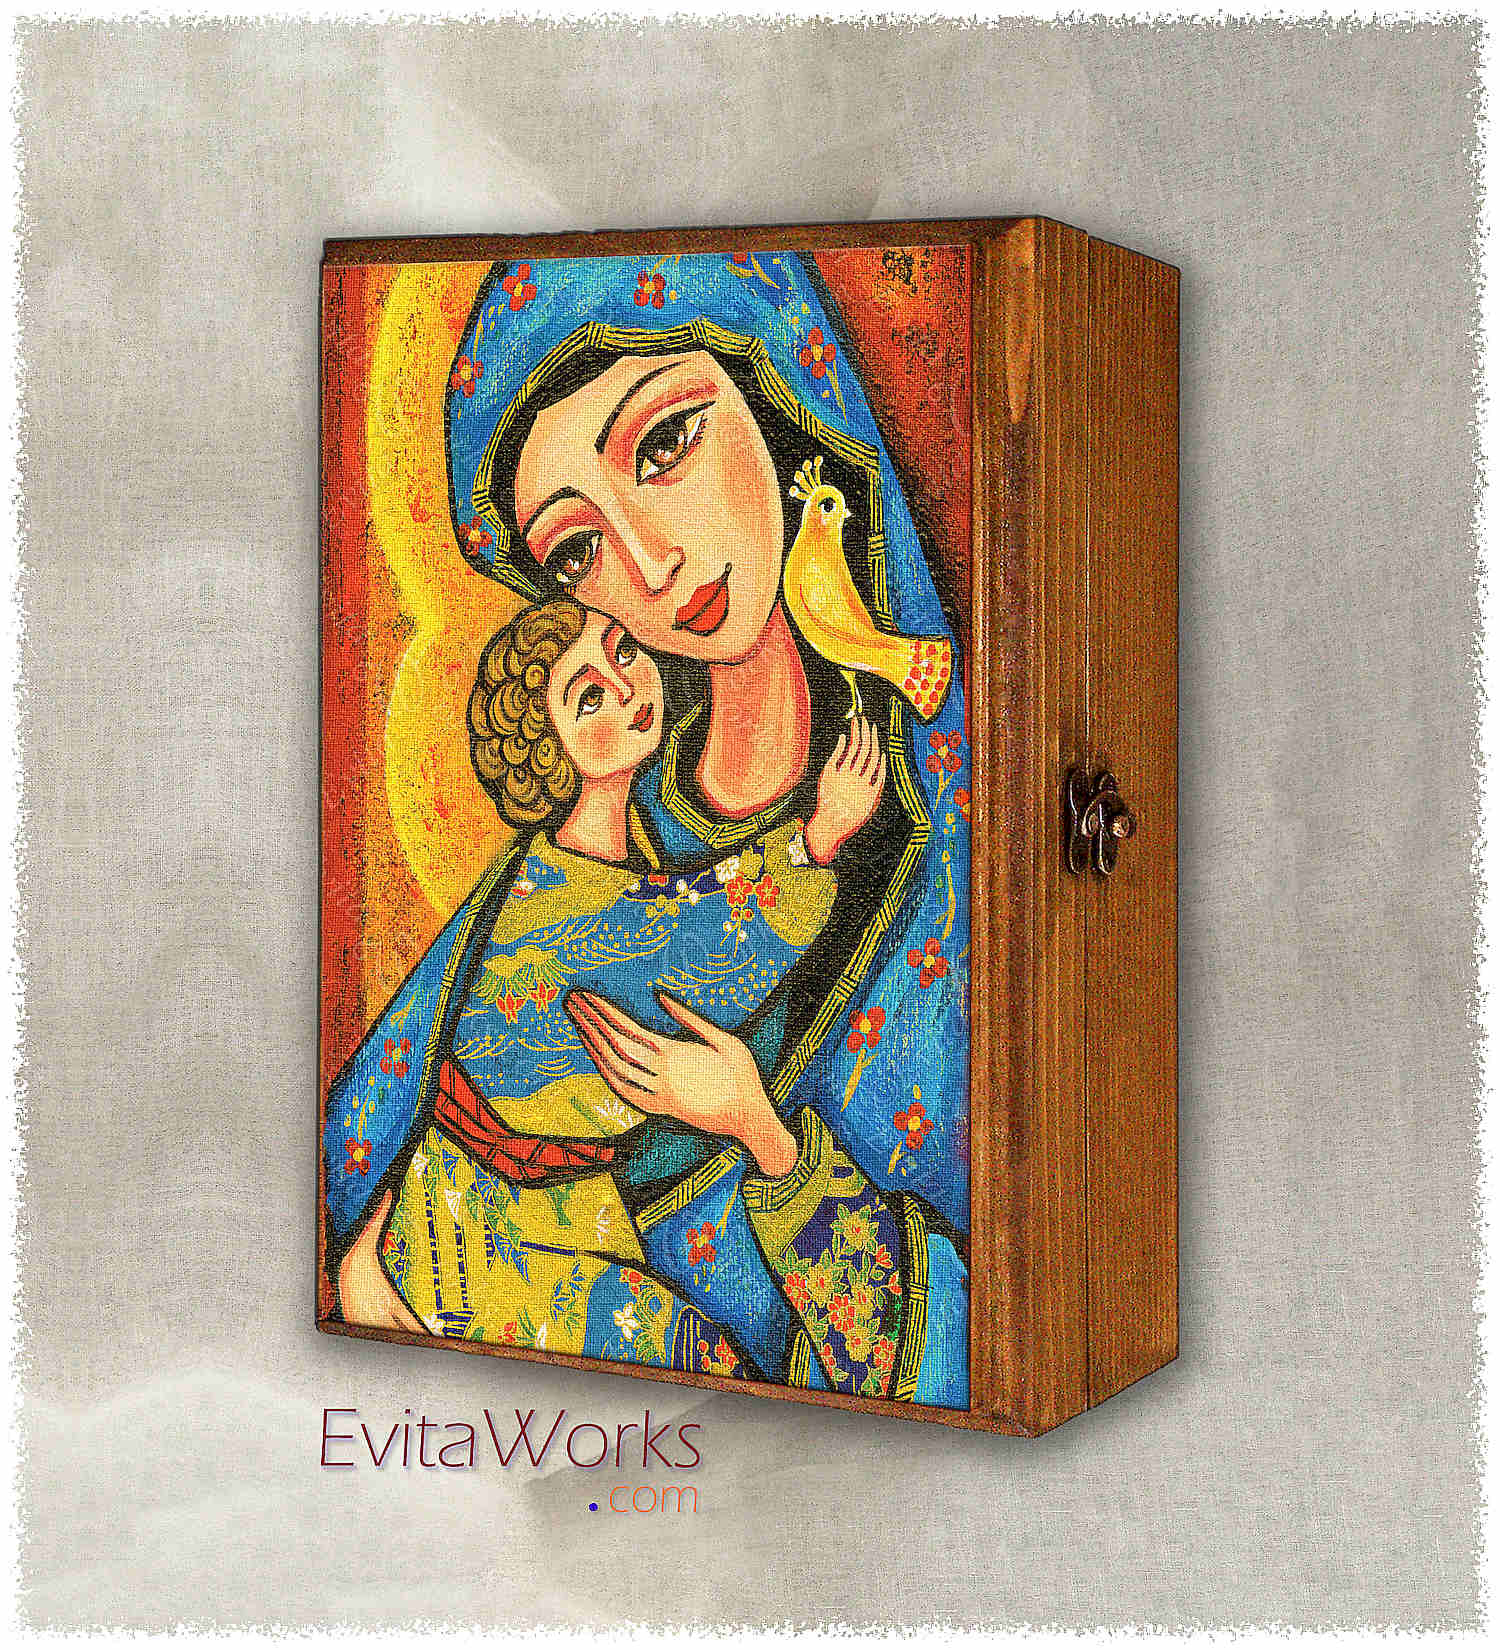 Hit to learn about "Mother Temple, Madonna and Child" on jewelboxes